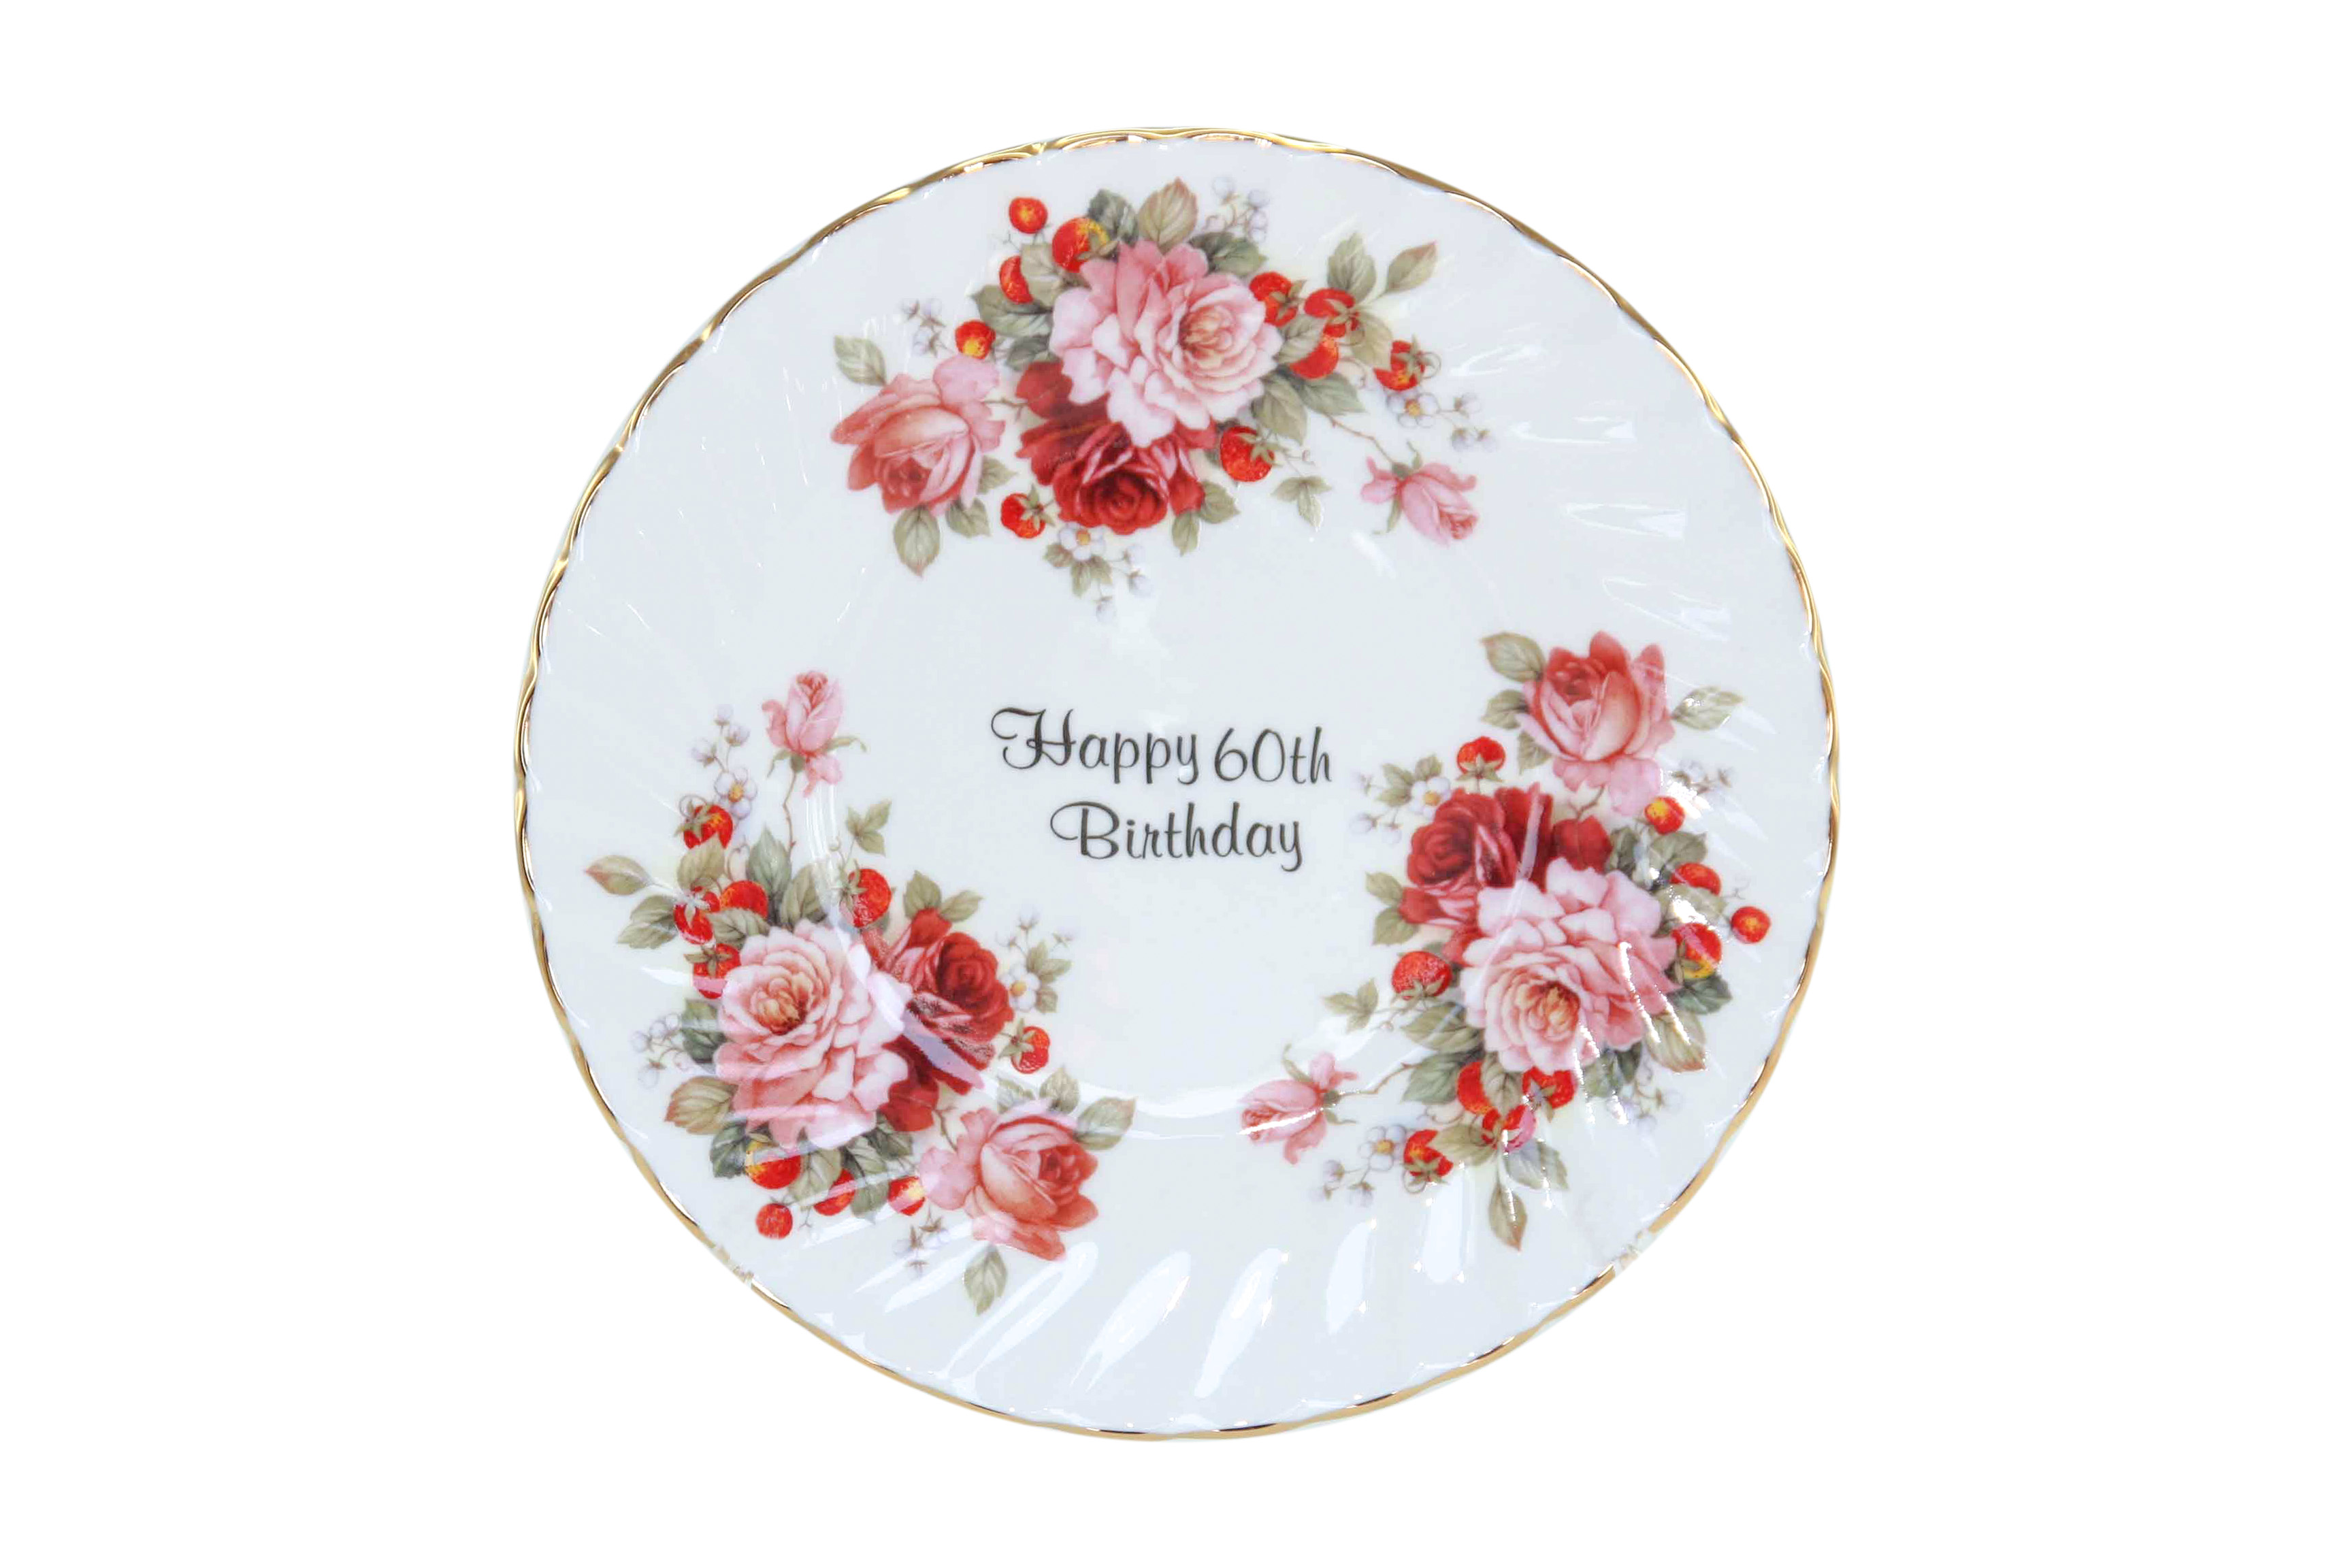 60th Birthday Cake/Display Plate - Click Image to Close